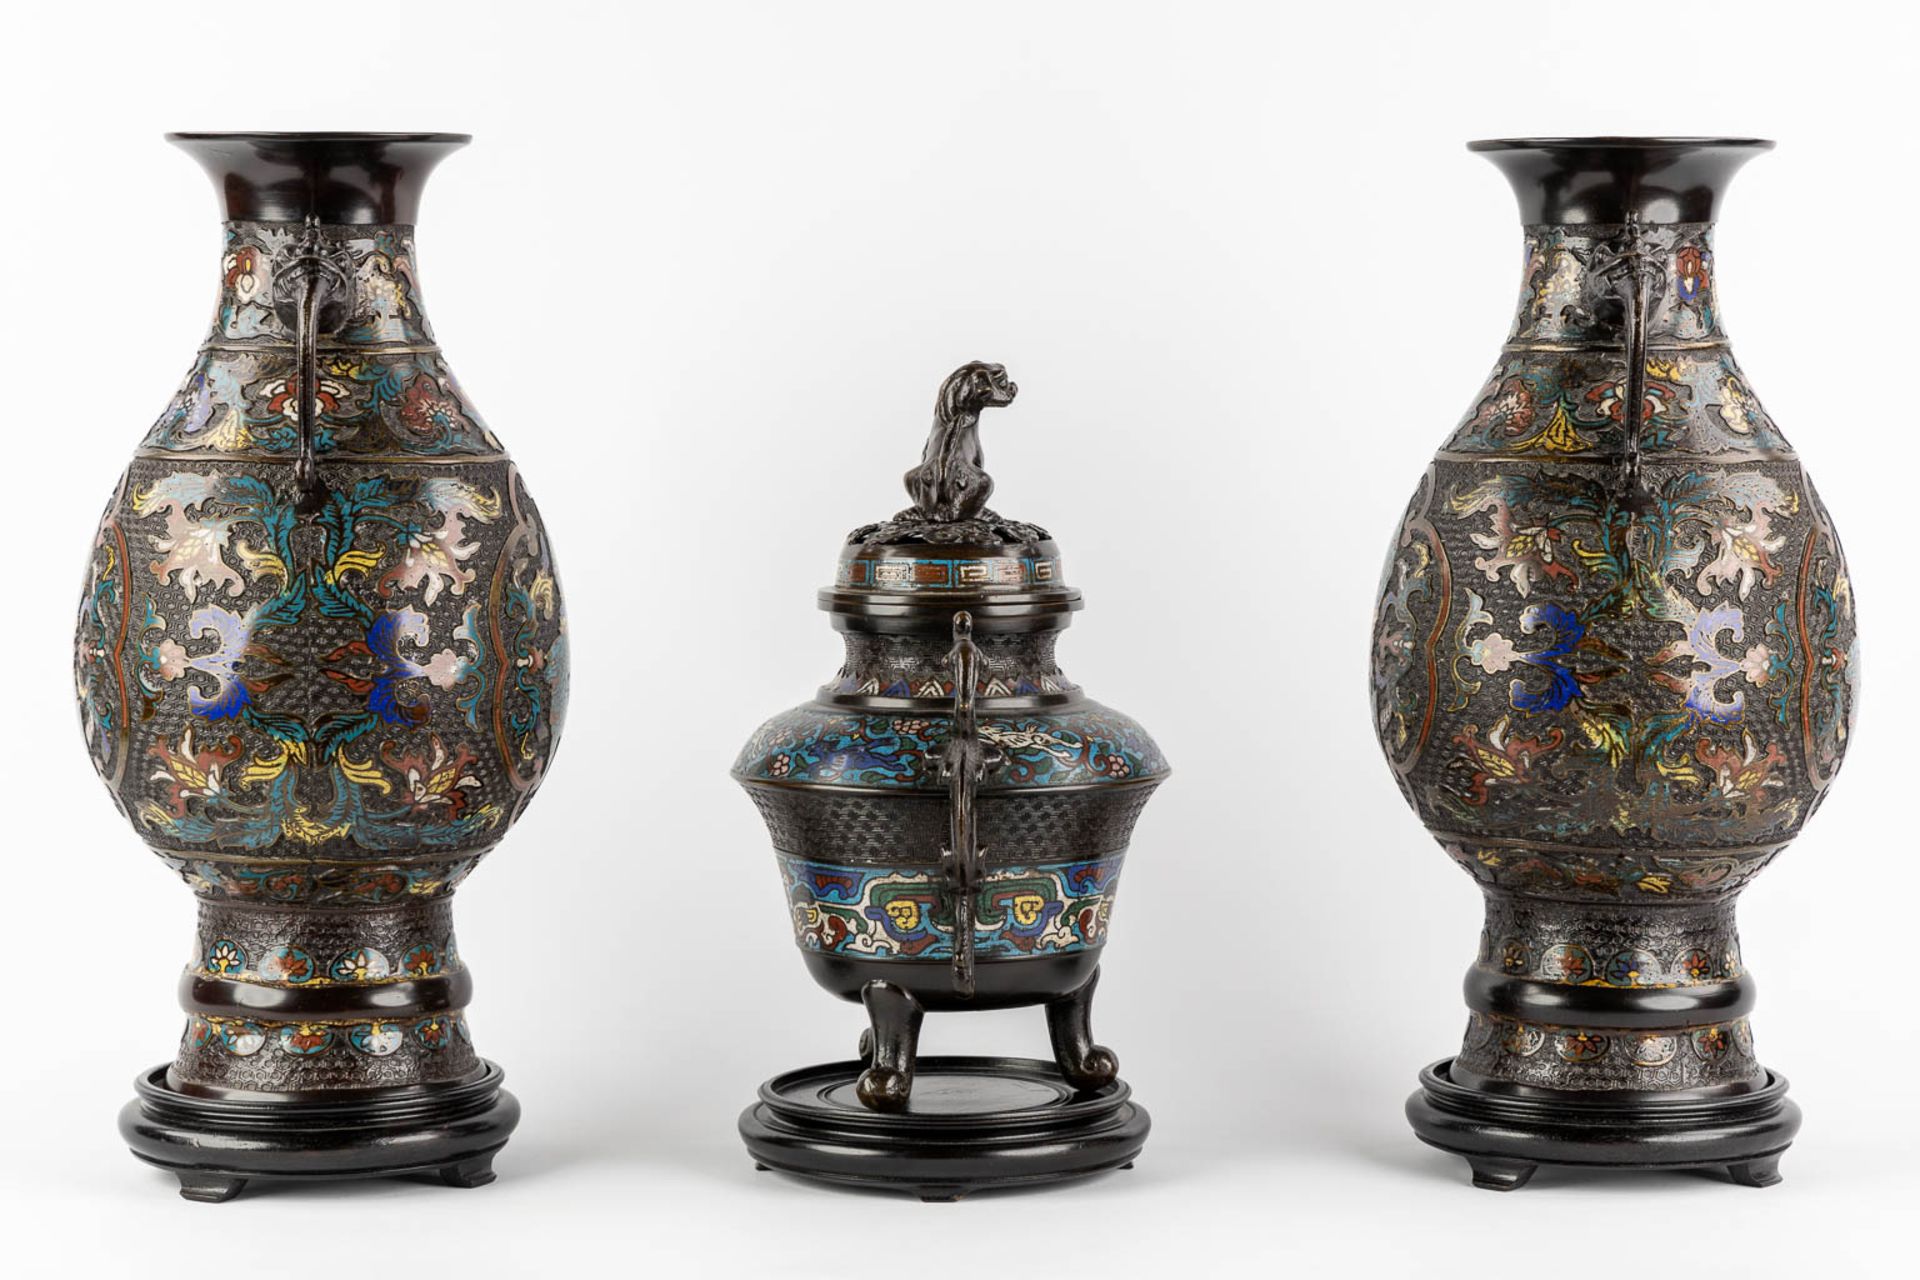 A pair of vases, added an insence burner, bronze with champslevé decor. Circa 1900. (H:45 x D:23 cm) - Image 4 of 15